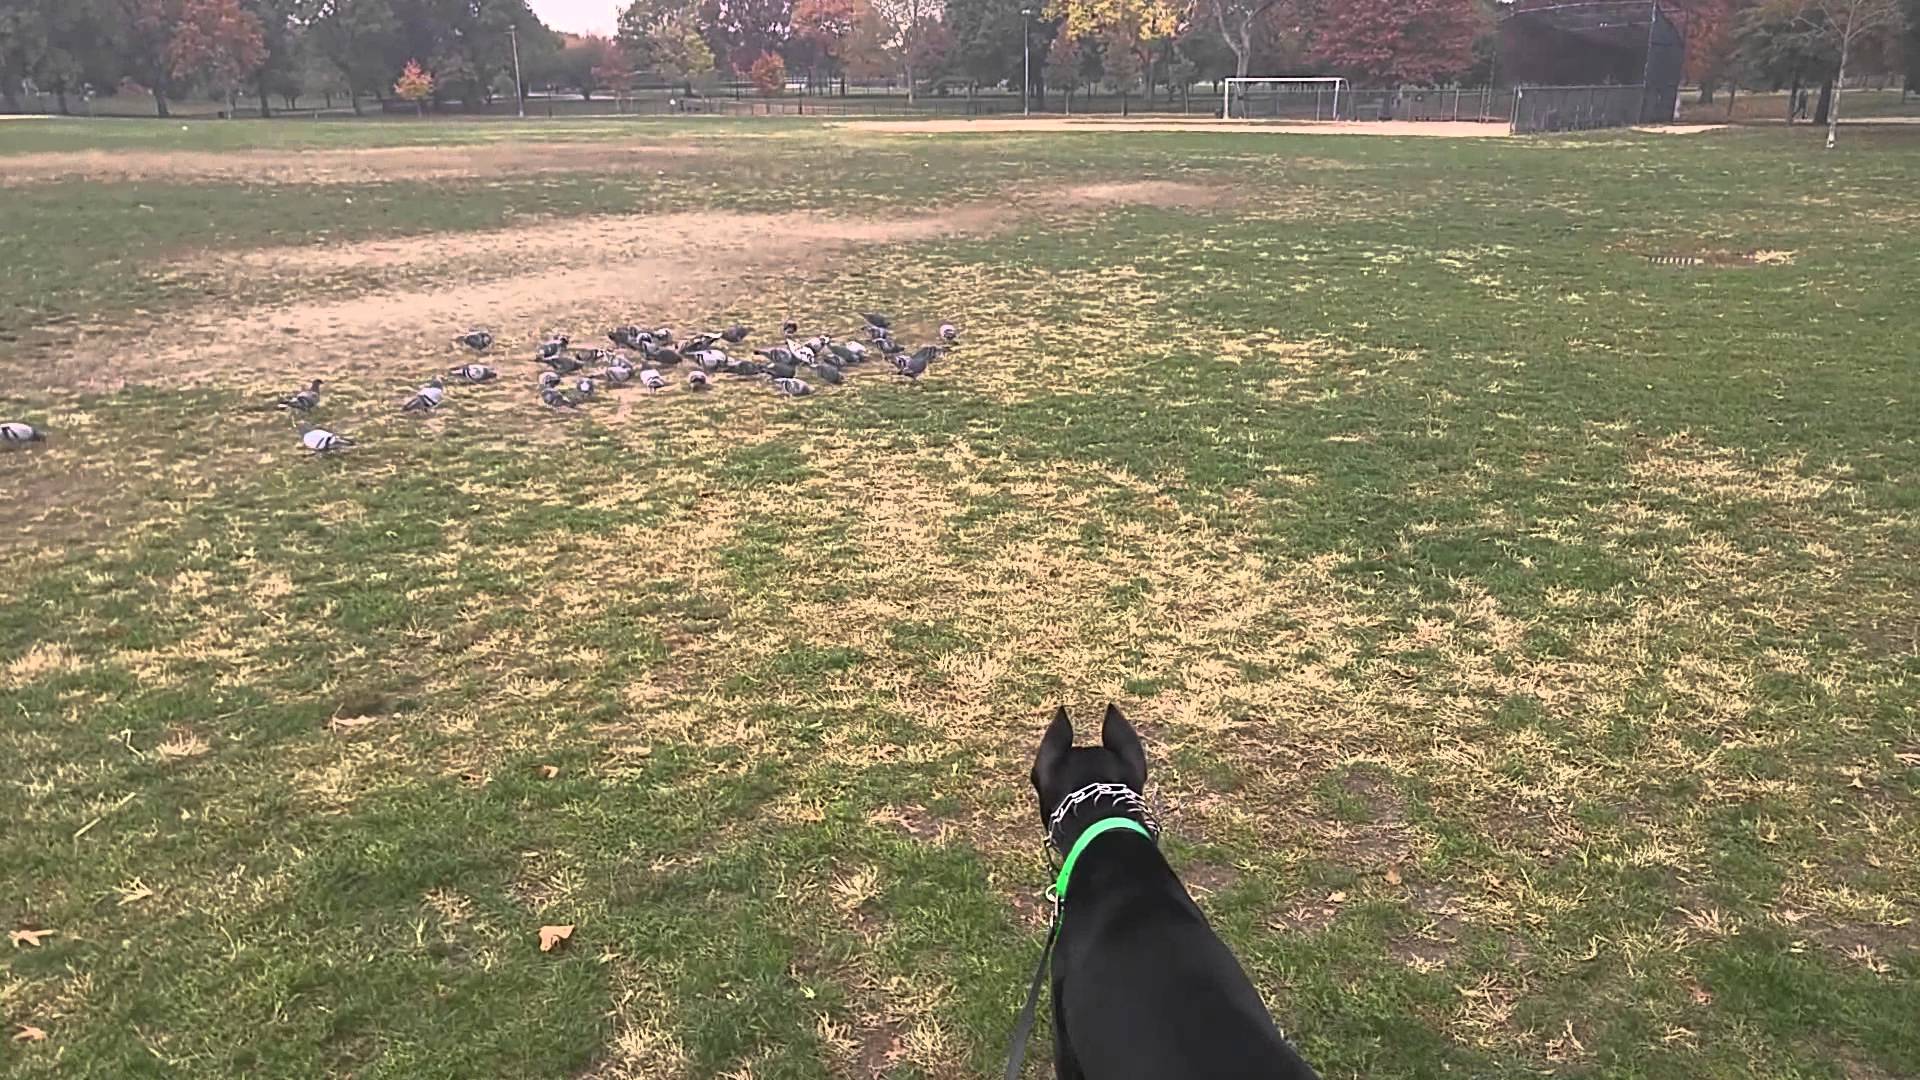 My dog chasing pigeons again in juniper Valley Par - YouTube